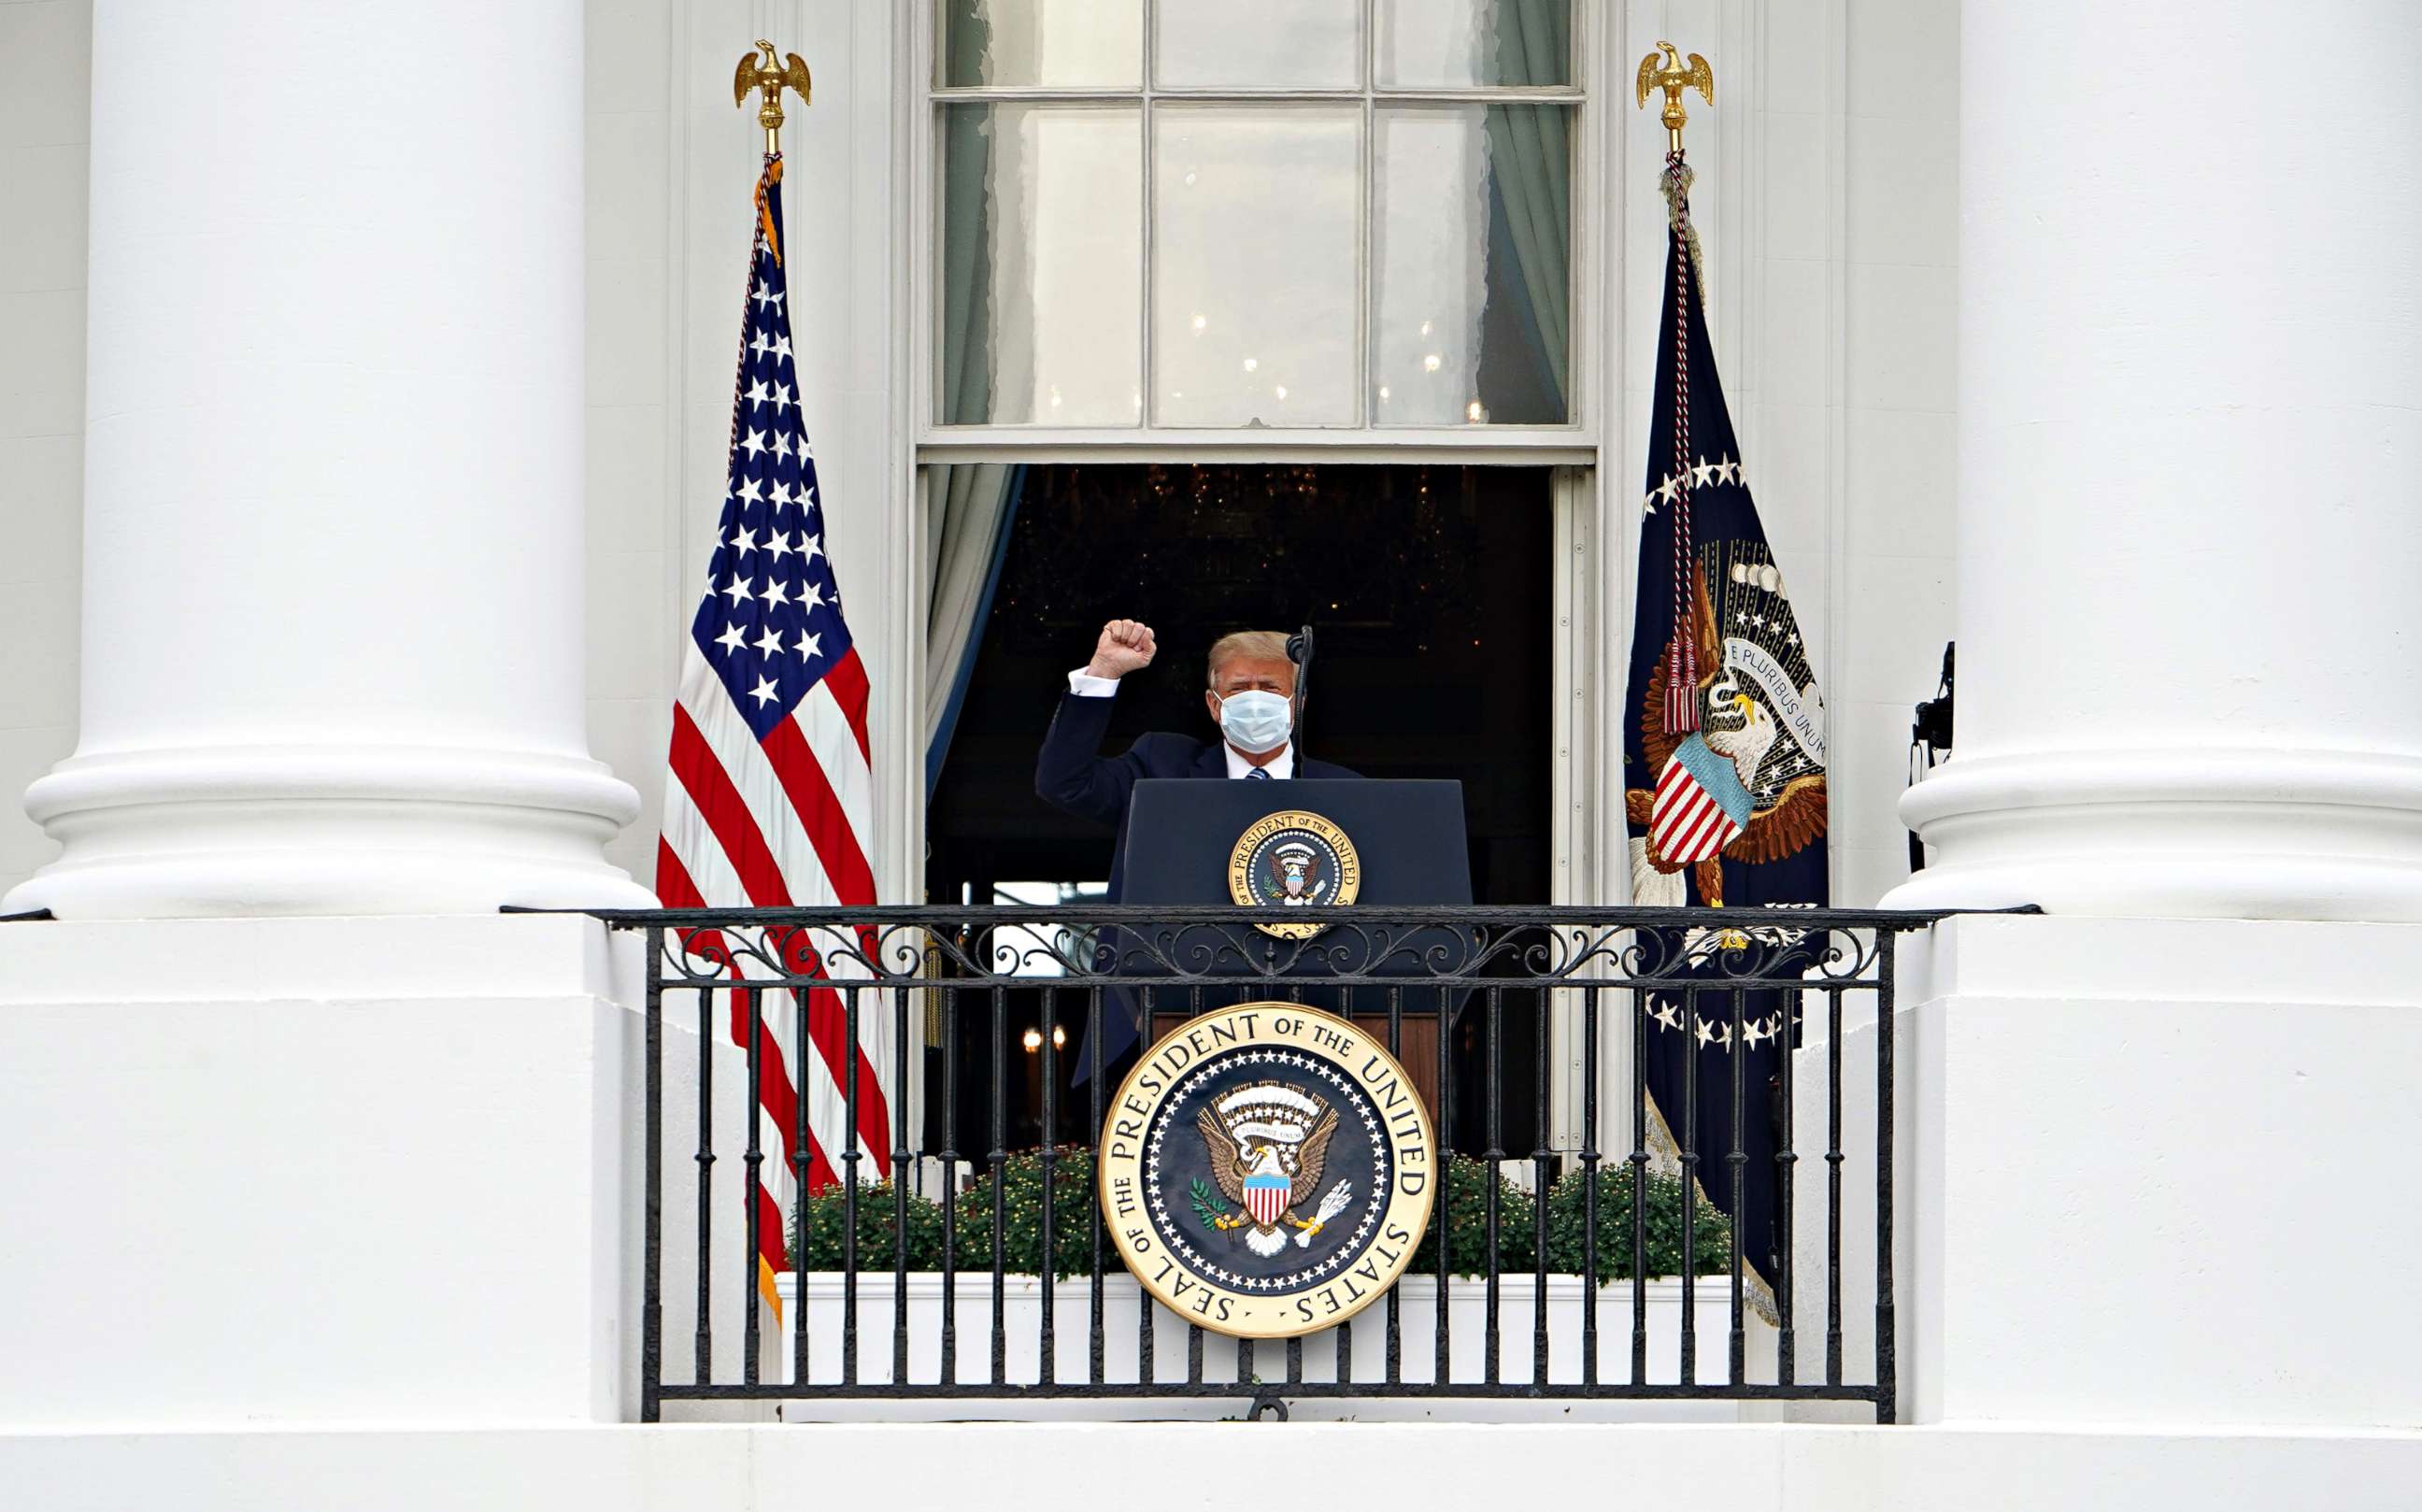 PHOTO: President Donald Trump arrives to speak about law and order from the South Portico of the White House in Washington on Oct. 10, 2020. Trump spoke publicly for the first time since testing positive for COVID-19.